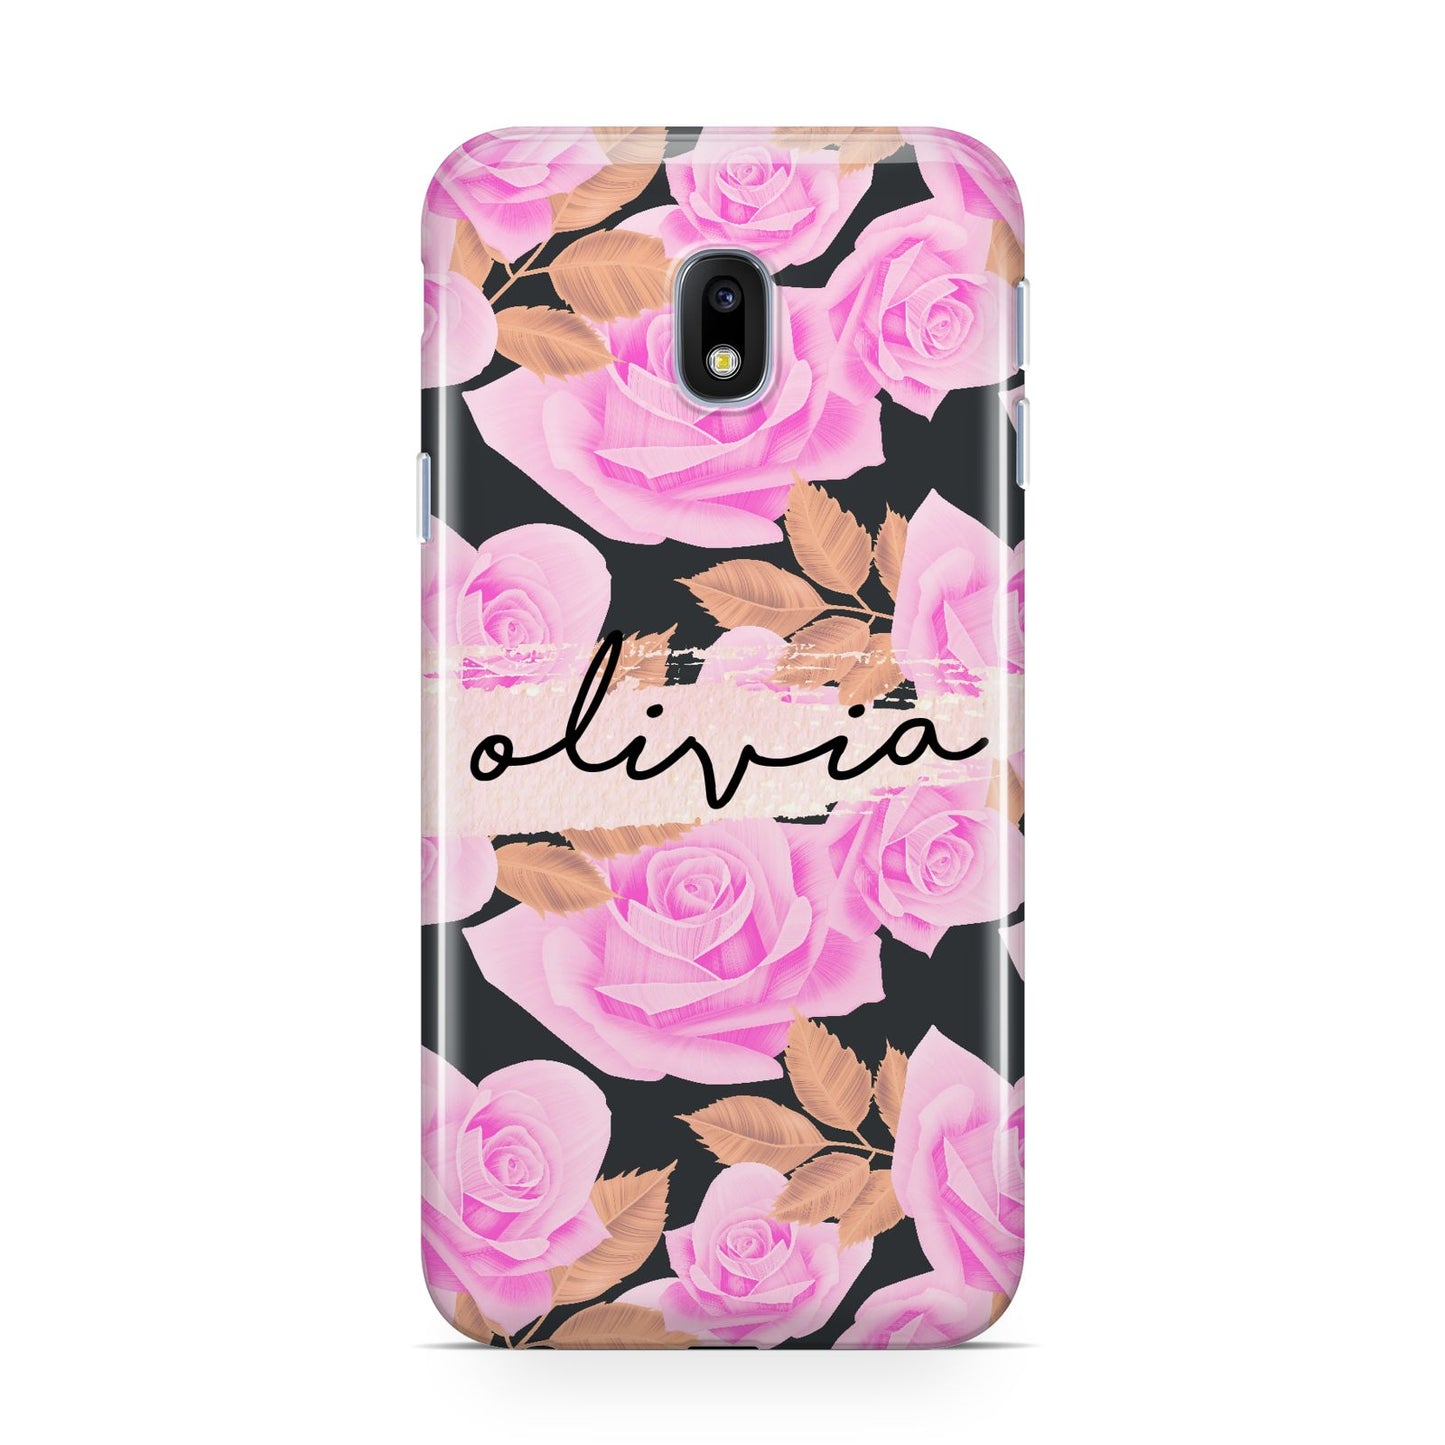 Personalised Floral Pink Roses Samsung Galaxy J3 2017 Case